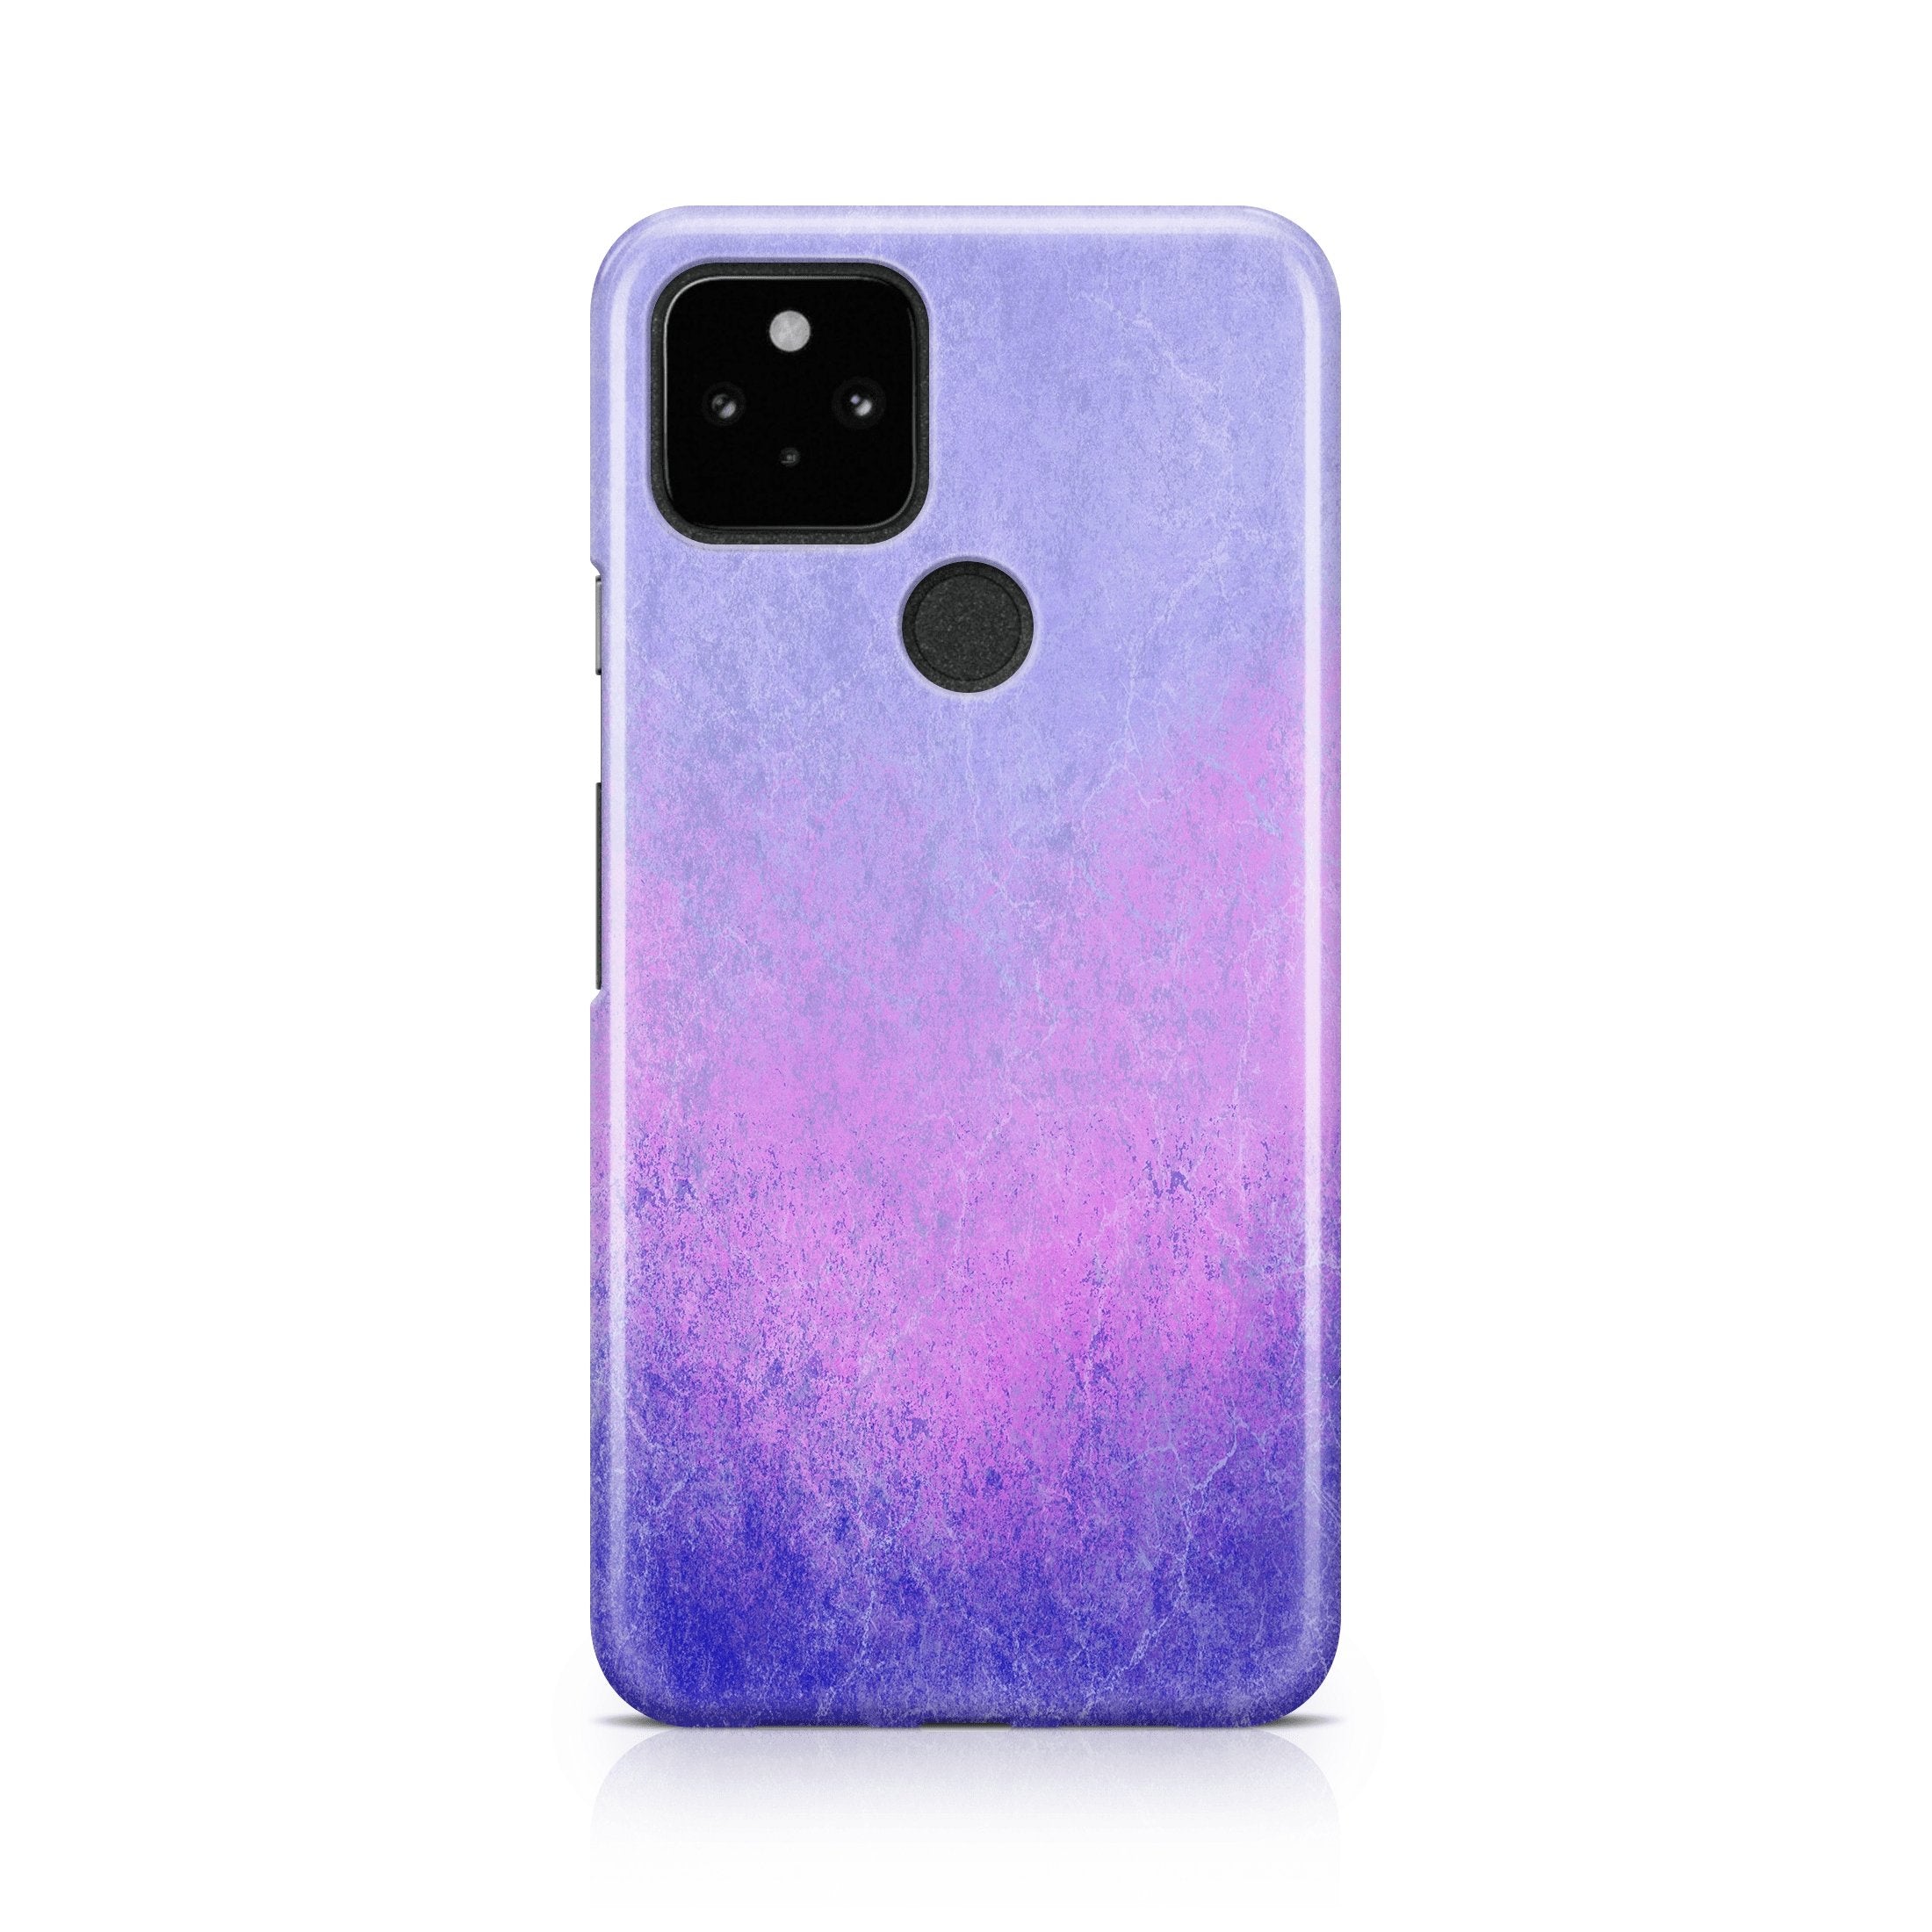 Fracture Lilac - Google phone case designs by CaseSwagger